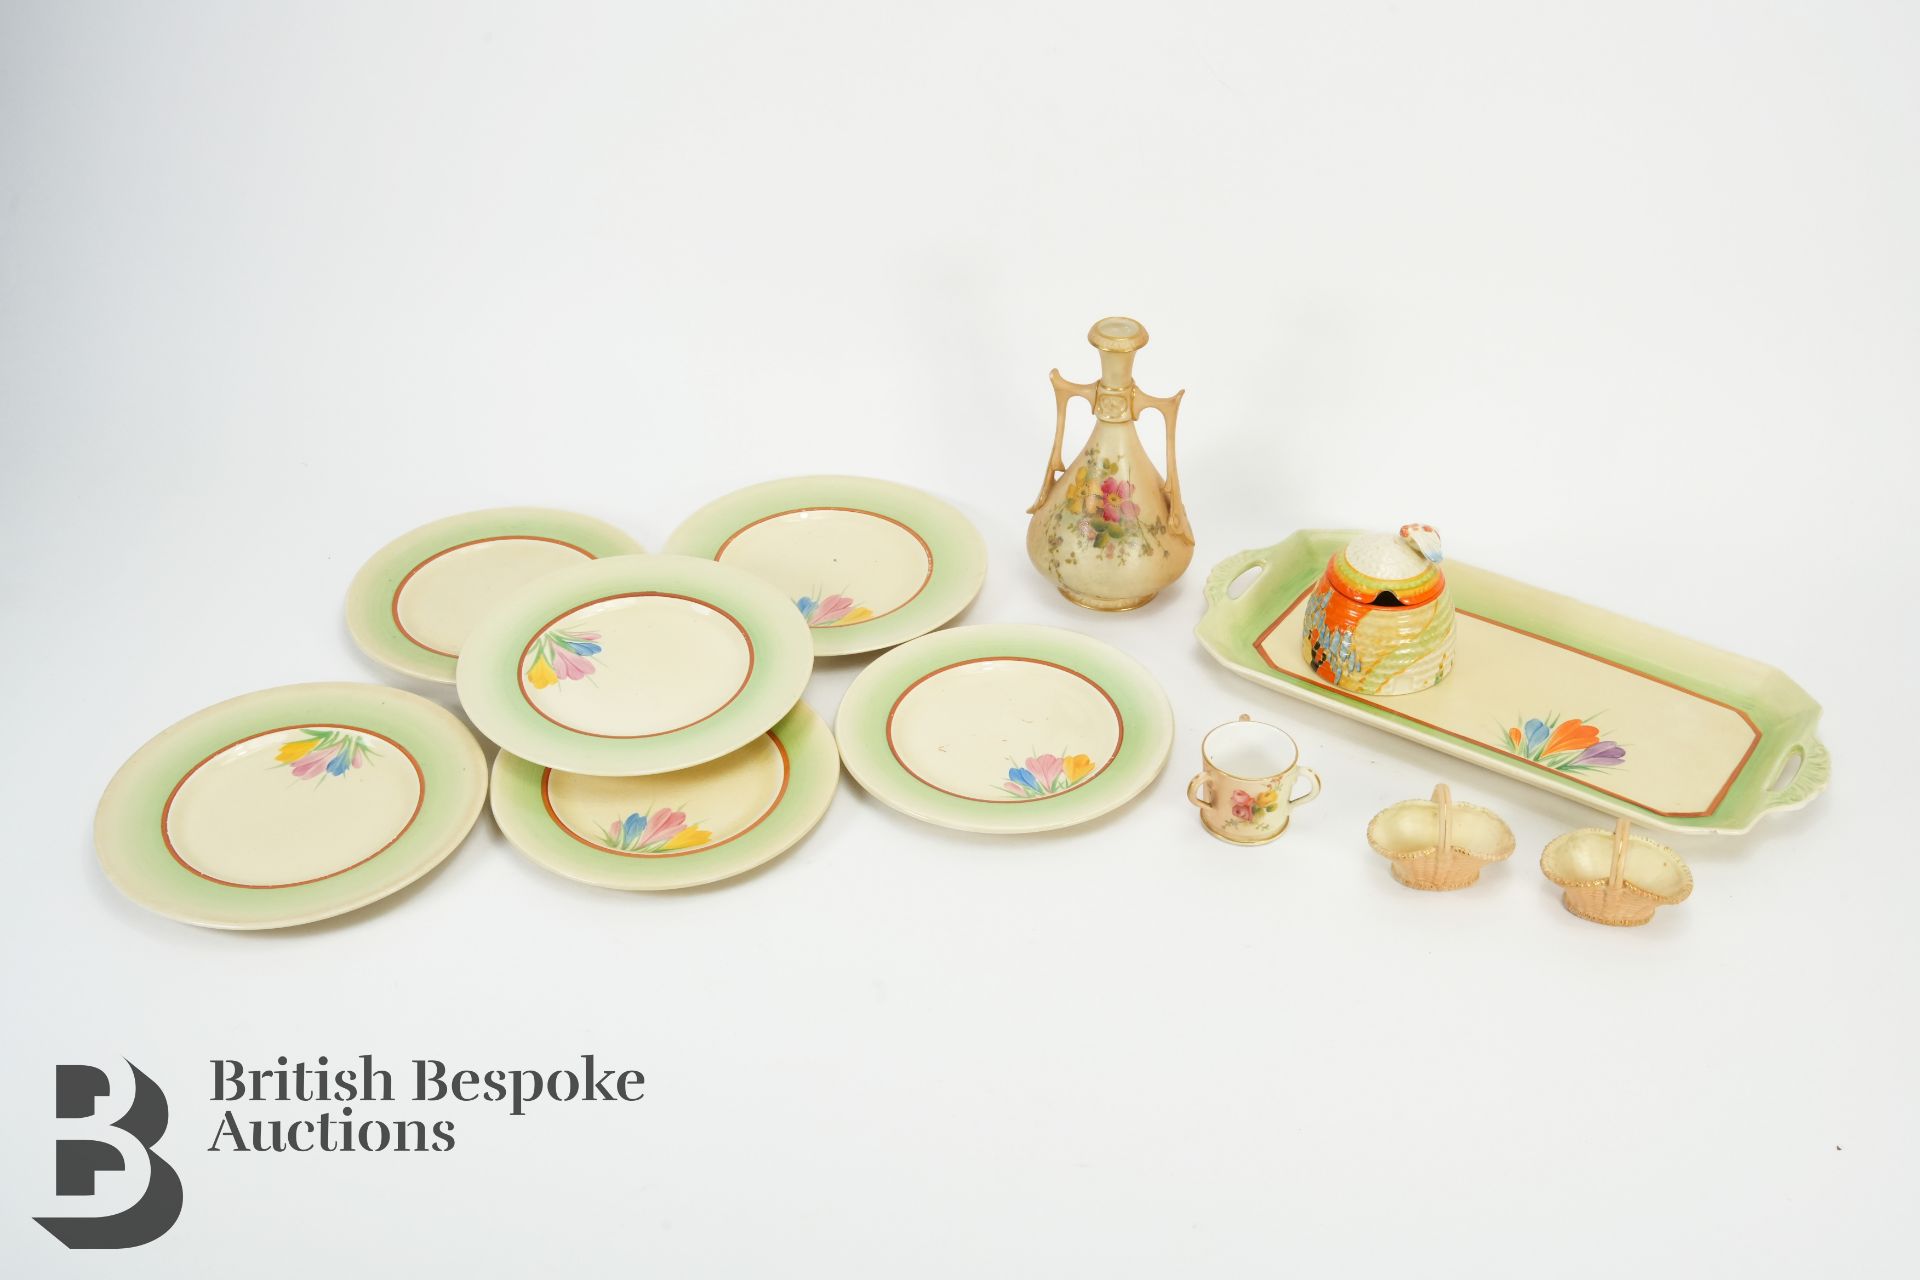 Clarice Cliff Plates and Honey Pot, and Royal Worcester Blush Ware